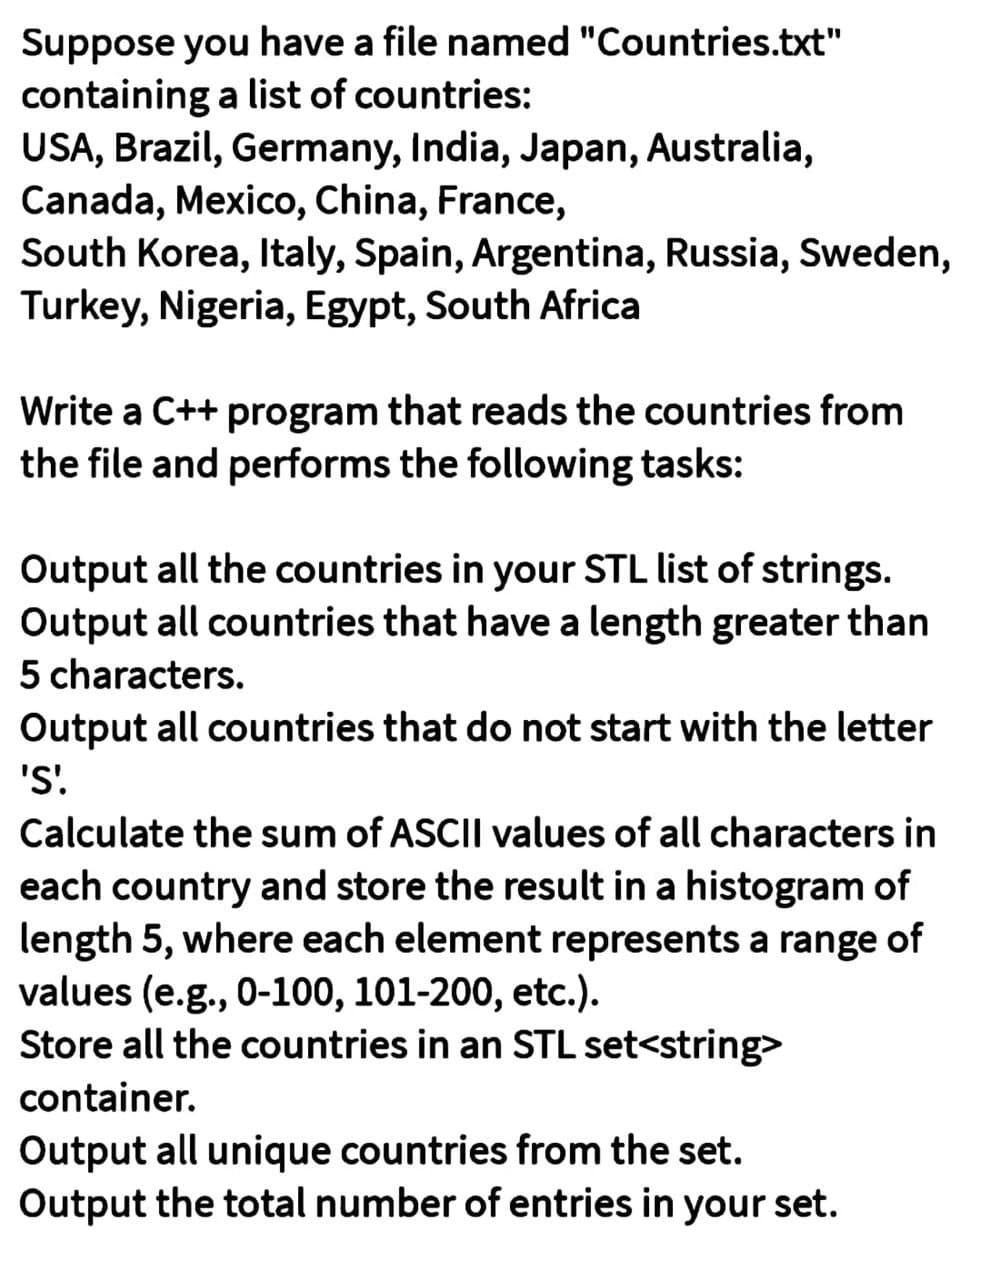 Suppose you have a file named "Countries.txt"
containing a list of countries:
USA, Brazil, Germany, India, Japan, Australia,
Canada, Mexico, China, France,
South Korea, Italy, Spain, Argentina, Russia, Sweden,
Turkey, Nigeria, Egypt, South Africa
Write a C++ program that reads the countries from
the file and performs the following tasks:
Output all the countries in your STL list of strings.
Output all countries that have a length greater than
5 characters.
Output all countries that do not start with the letter
'S'.
Calculate the sum of ASCII values of all characters in
each country and store the result in a histogram of
length 5, where each element represents a range of
values (e.g., 0-100, 101-200, etc.).
Store all the countries in an STL set<string>
container.
Output all unique countries from the set.
Output the total number of entries in your set.